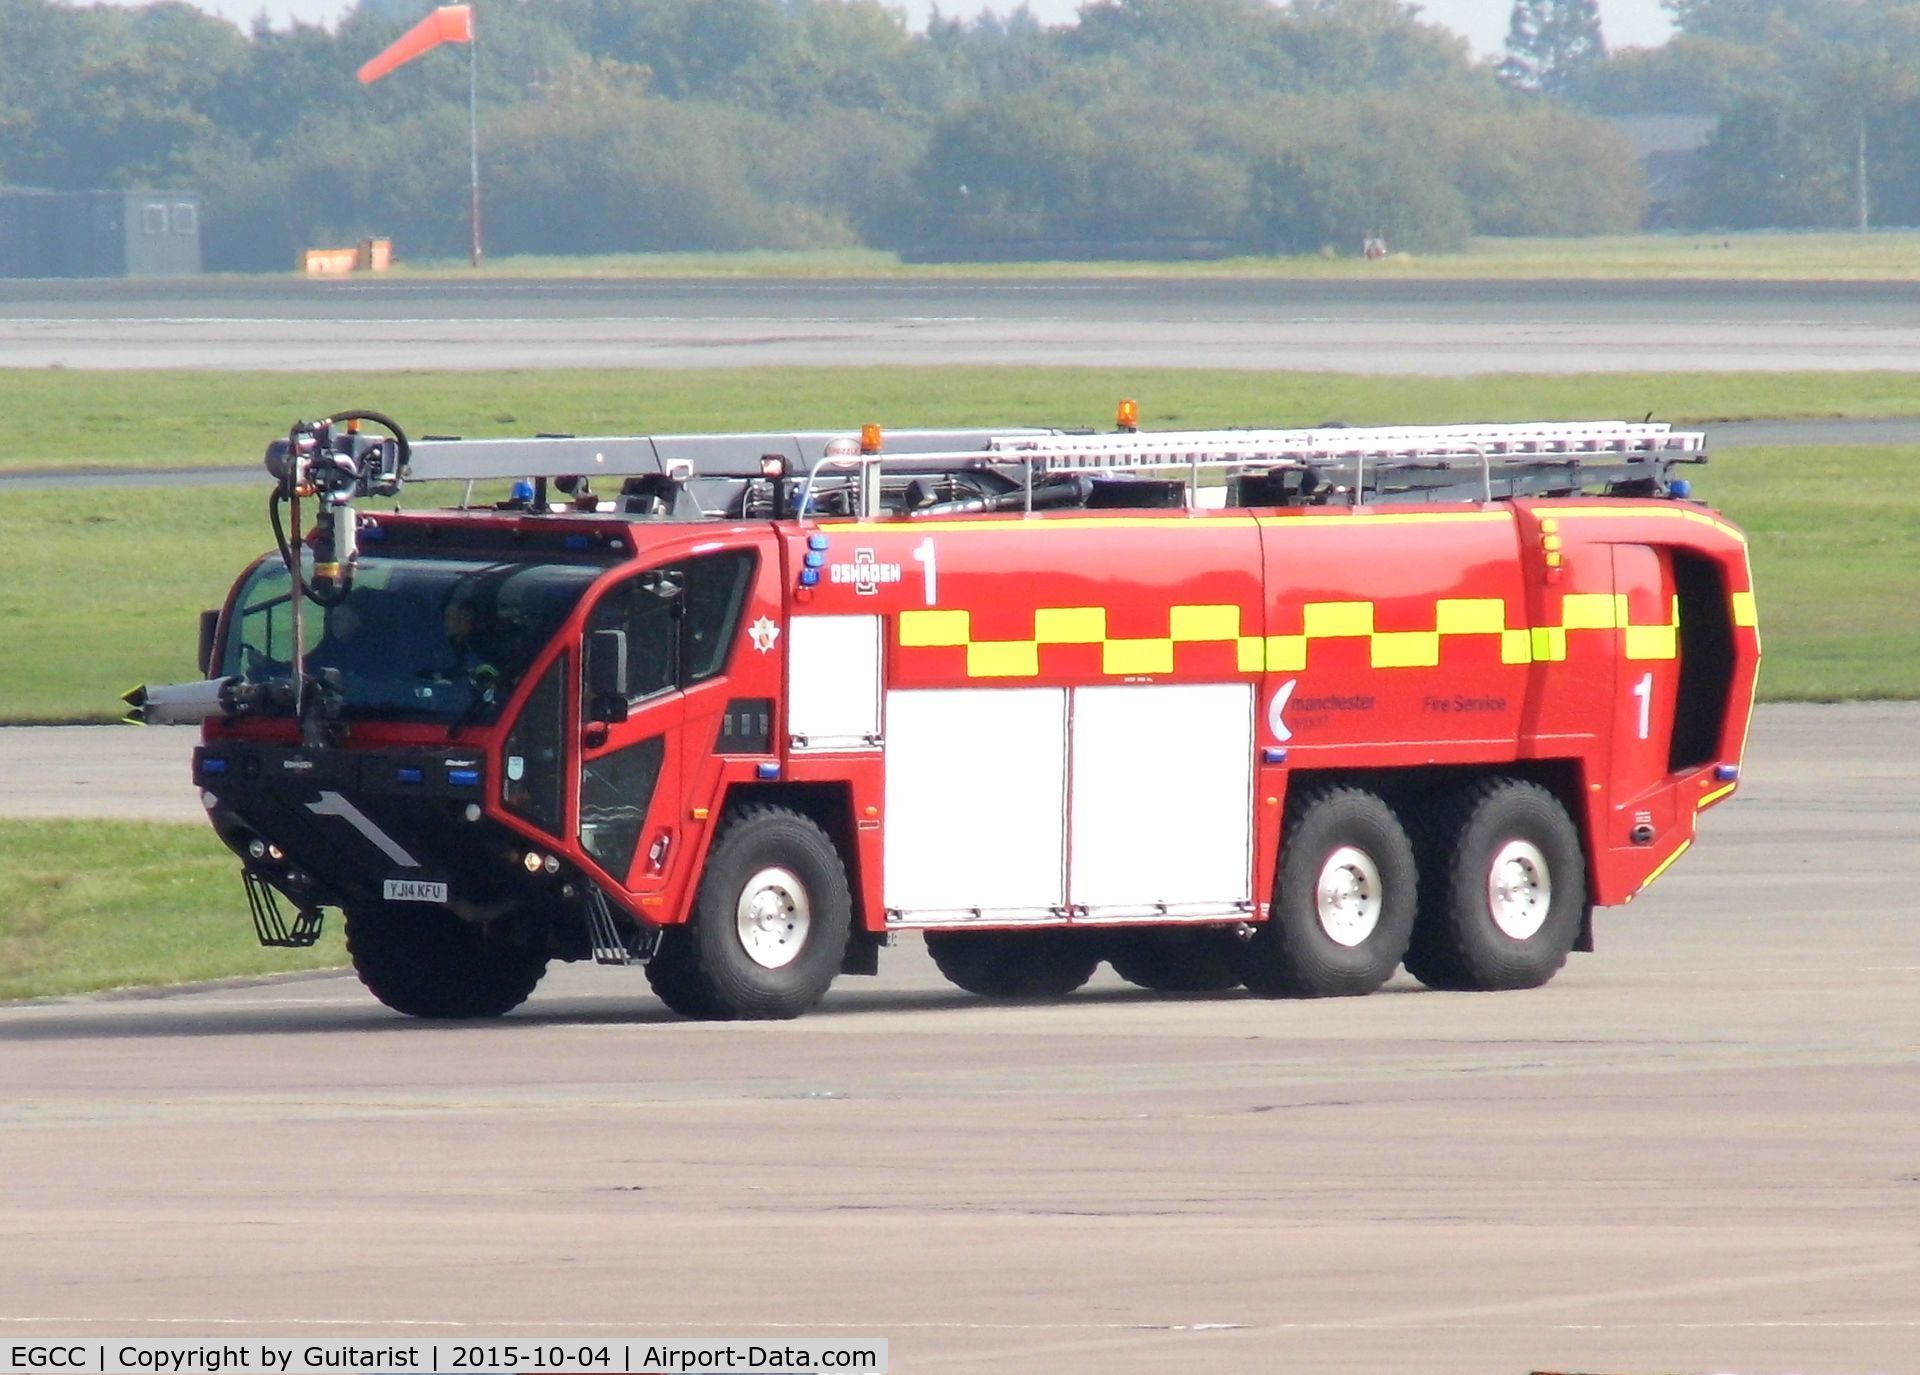 Manchester Airport, Manchester, England United Kingdom (EGCC) - Fire engine 1 at Manchester